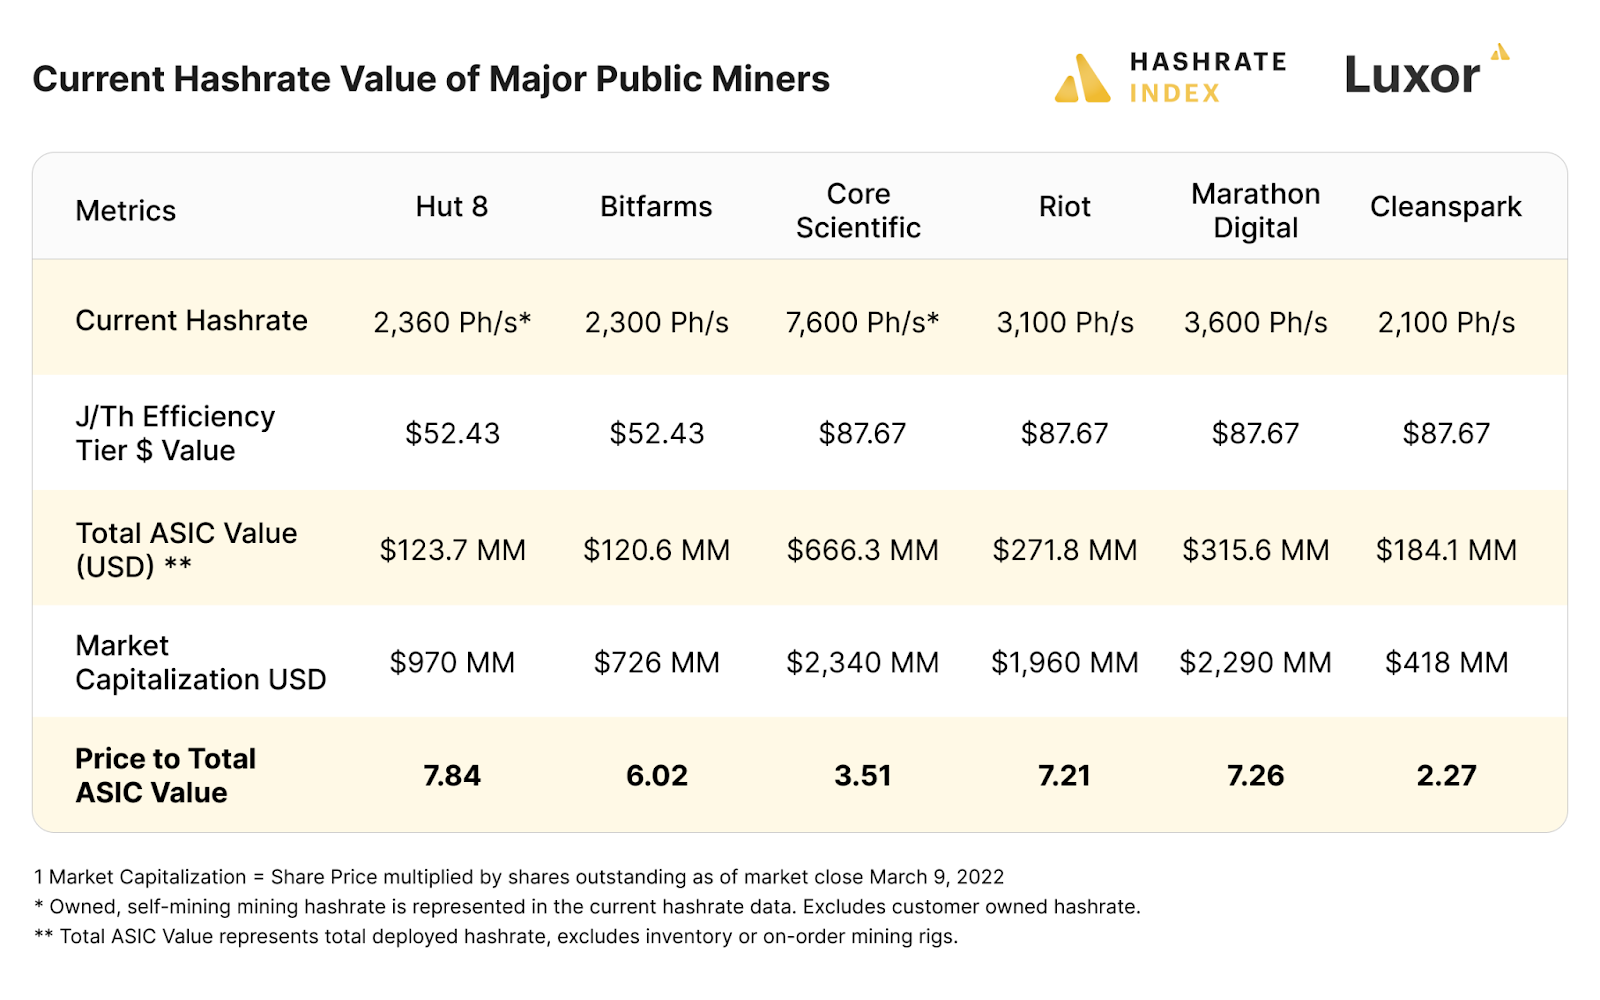 Public Bitcoin miners price-to-asic-value ratio